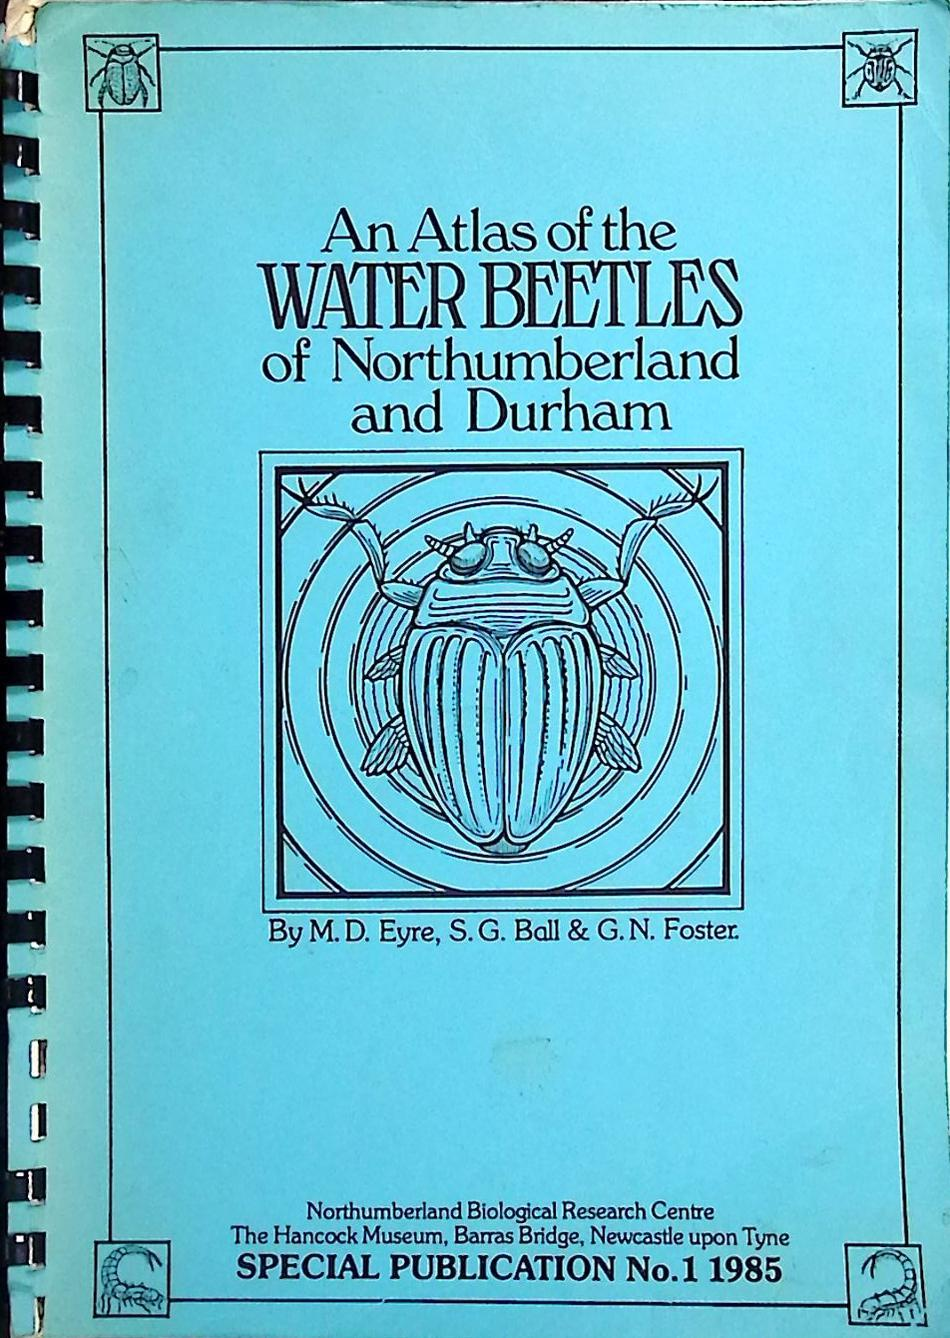 An Atlas of the Water Beetles of Northumberland and Durham